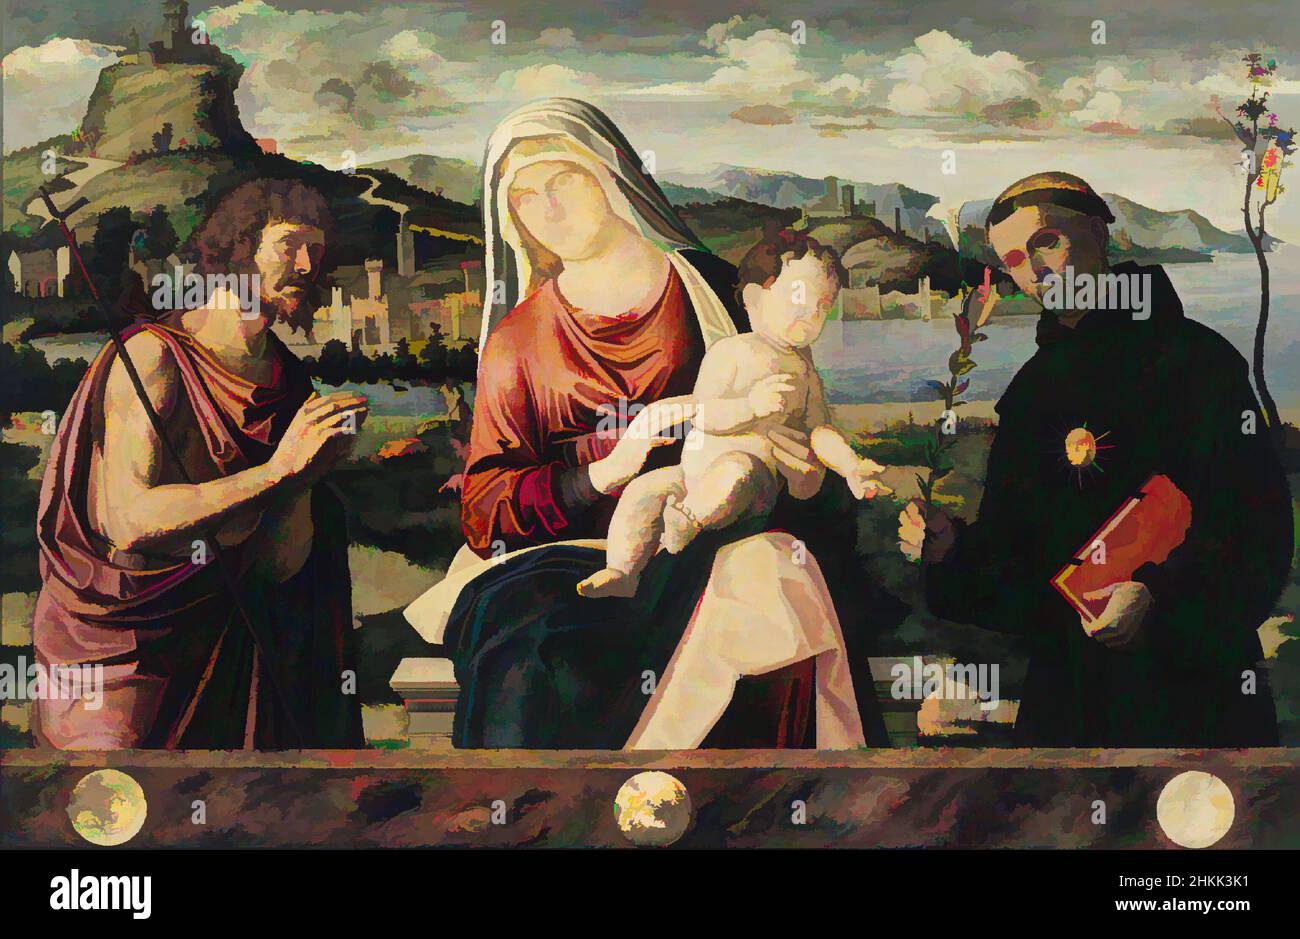 Art inspired by Madonna and Child with Saints John the Baptist and Nicholas of Tolentino, Tempera and oil on poplar panel, early 1500s, 28 3/8 x 43 3/4 in., 72.1 x 111.1 cm, x-ray, Classic works modernized by Artotop with a splash of modernity. Shapes, color and value, eye-catching visual impact on art. Emotions through freedom of artworks in a contemporary way. A timeless message pursuing a wildly creative new direction. Artists turning to the digital medium and creating the Artotop NFT Stock Photo